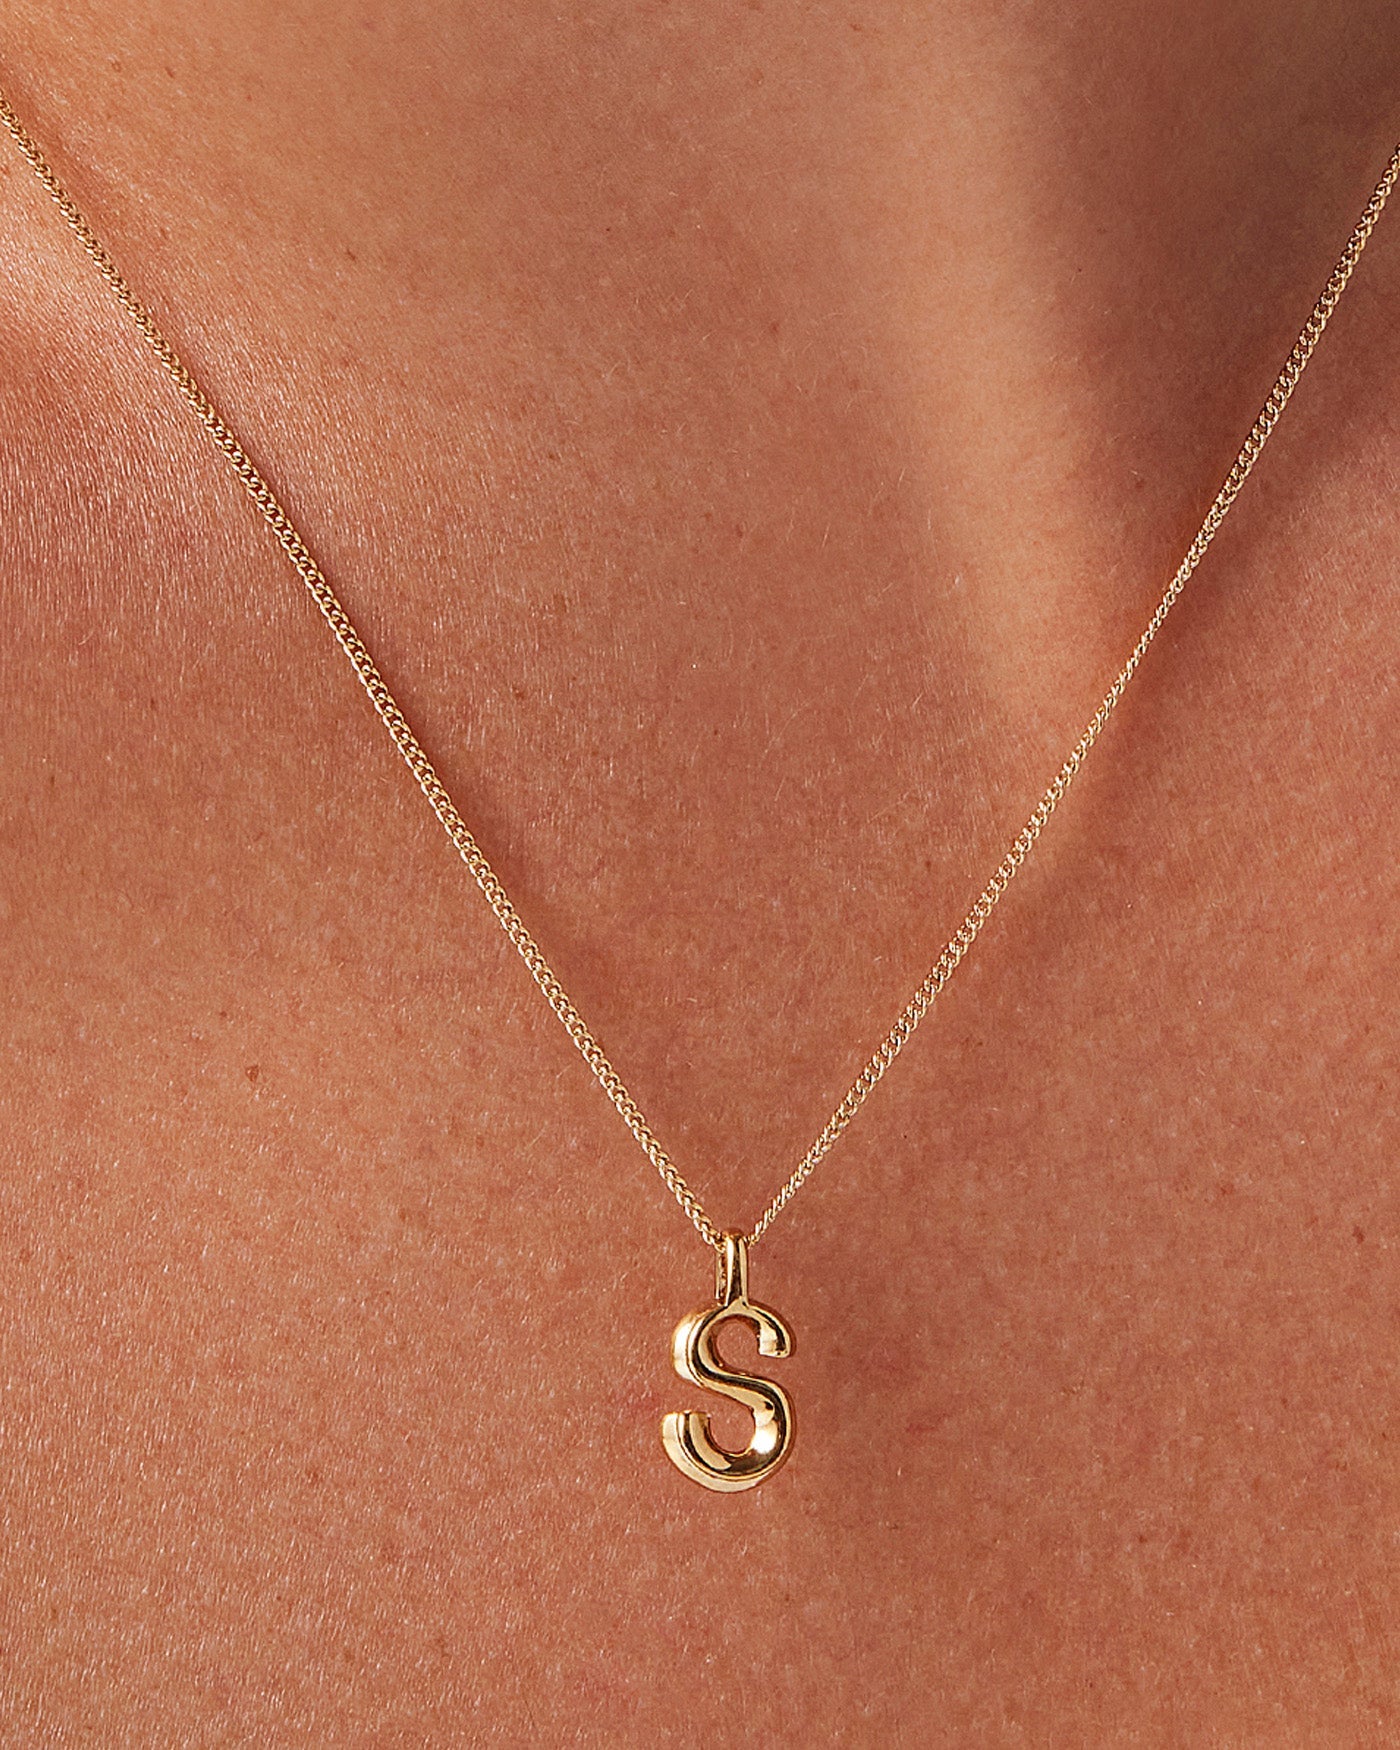 Personalized Swirly Monogram Necklace - Initials Disk Necklace [19mm]